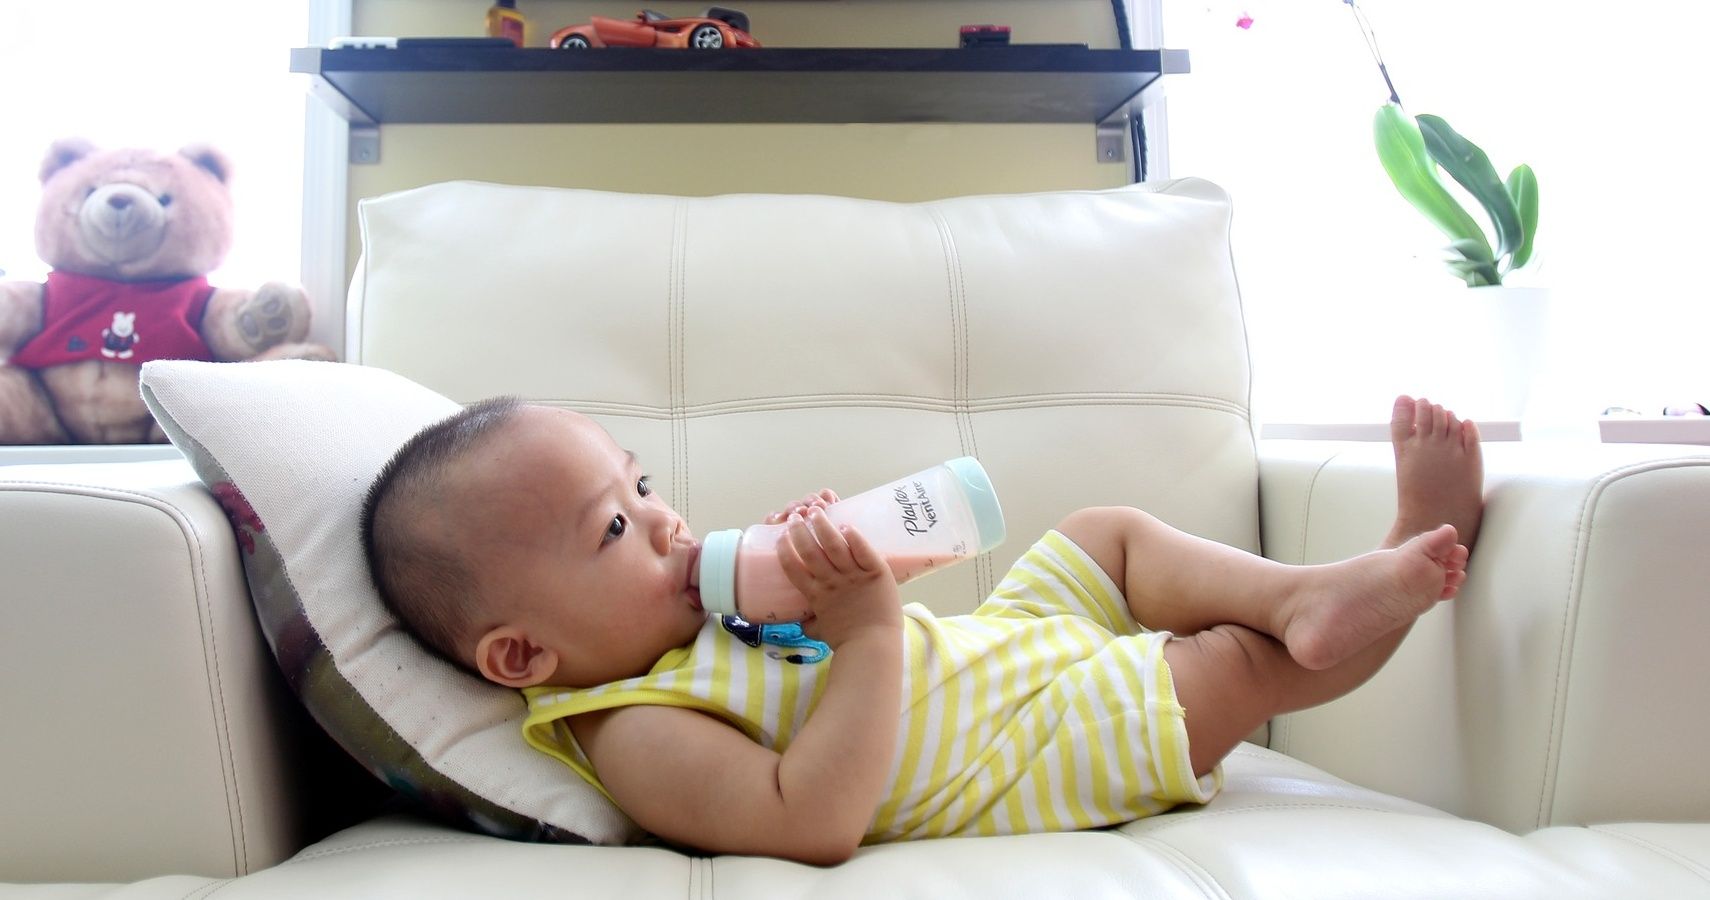 A guide to the most practical sippy cups by age